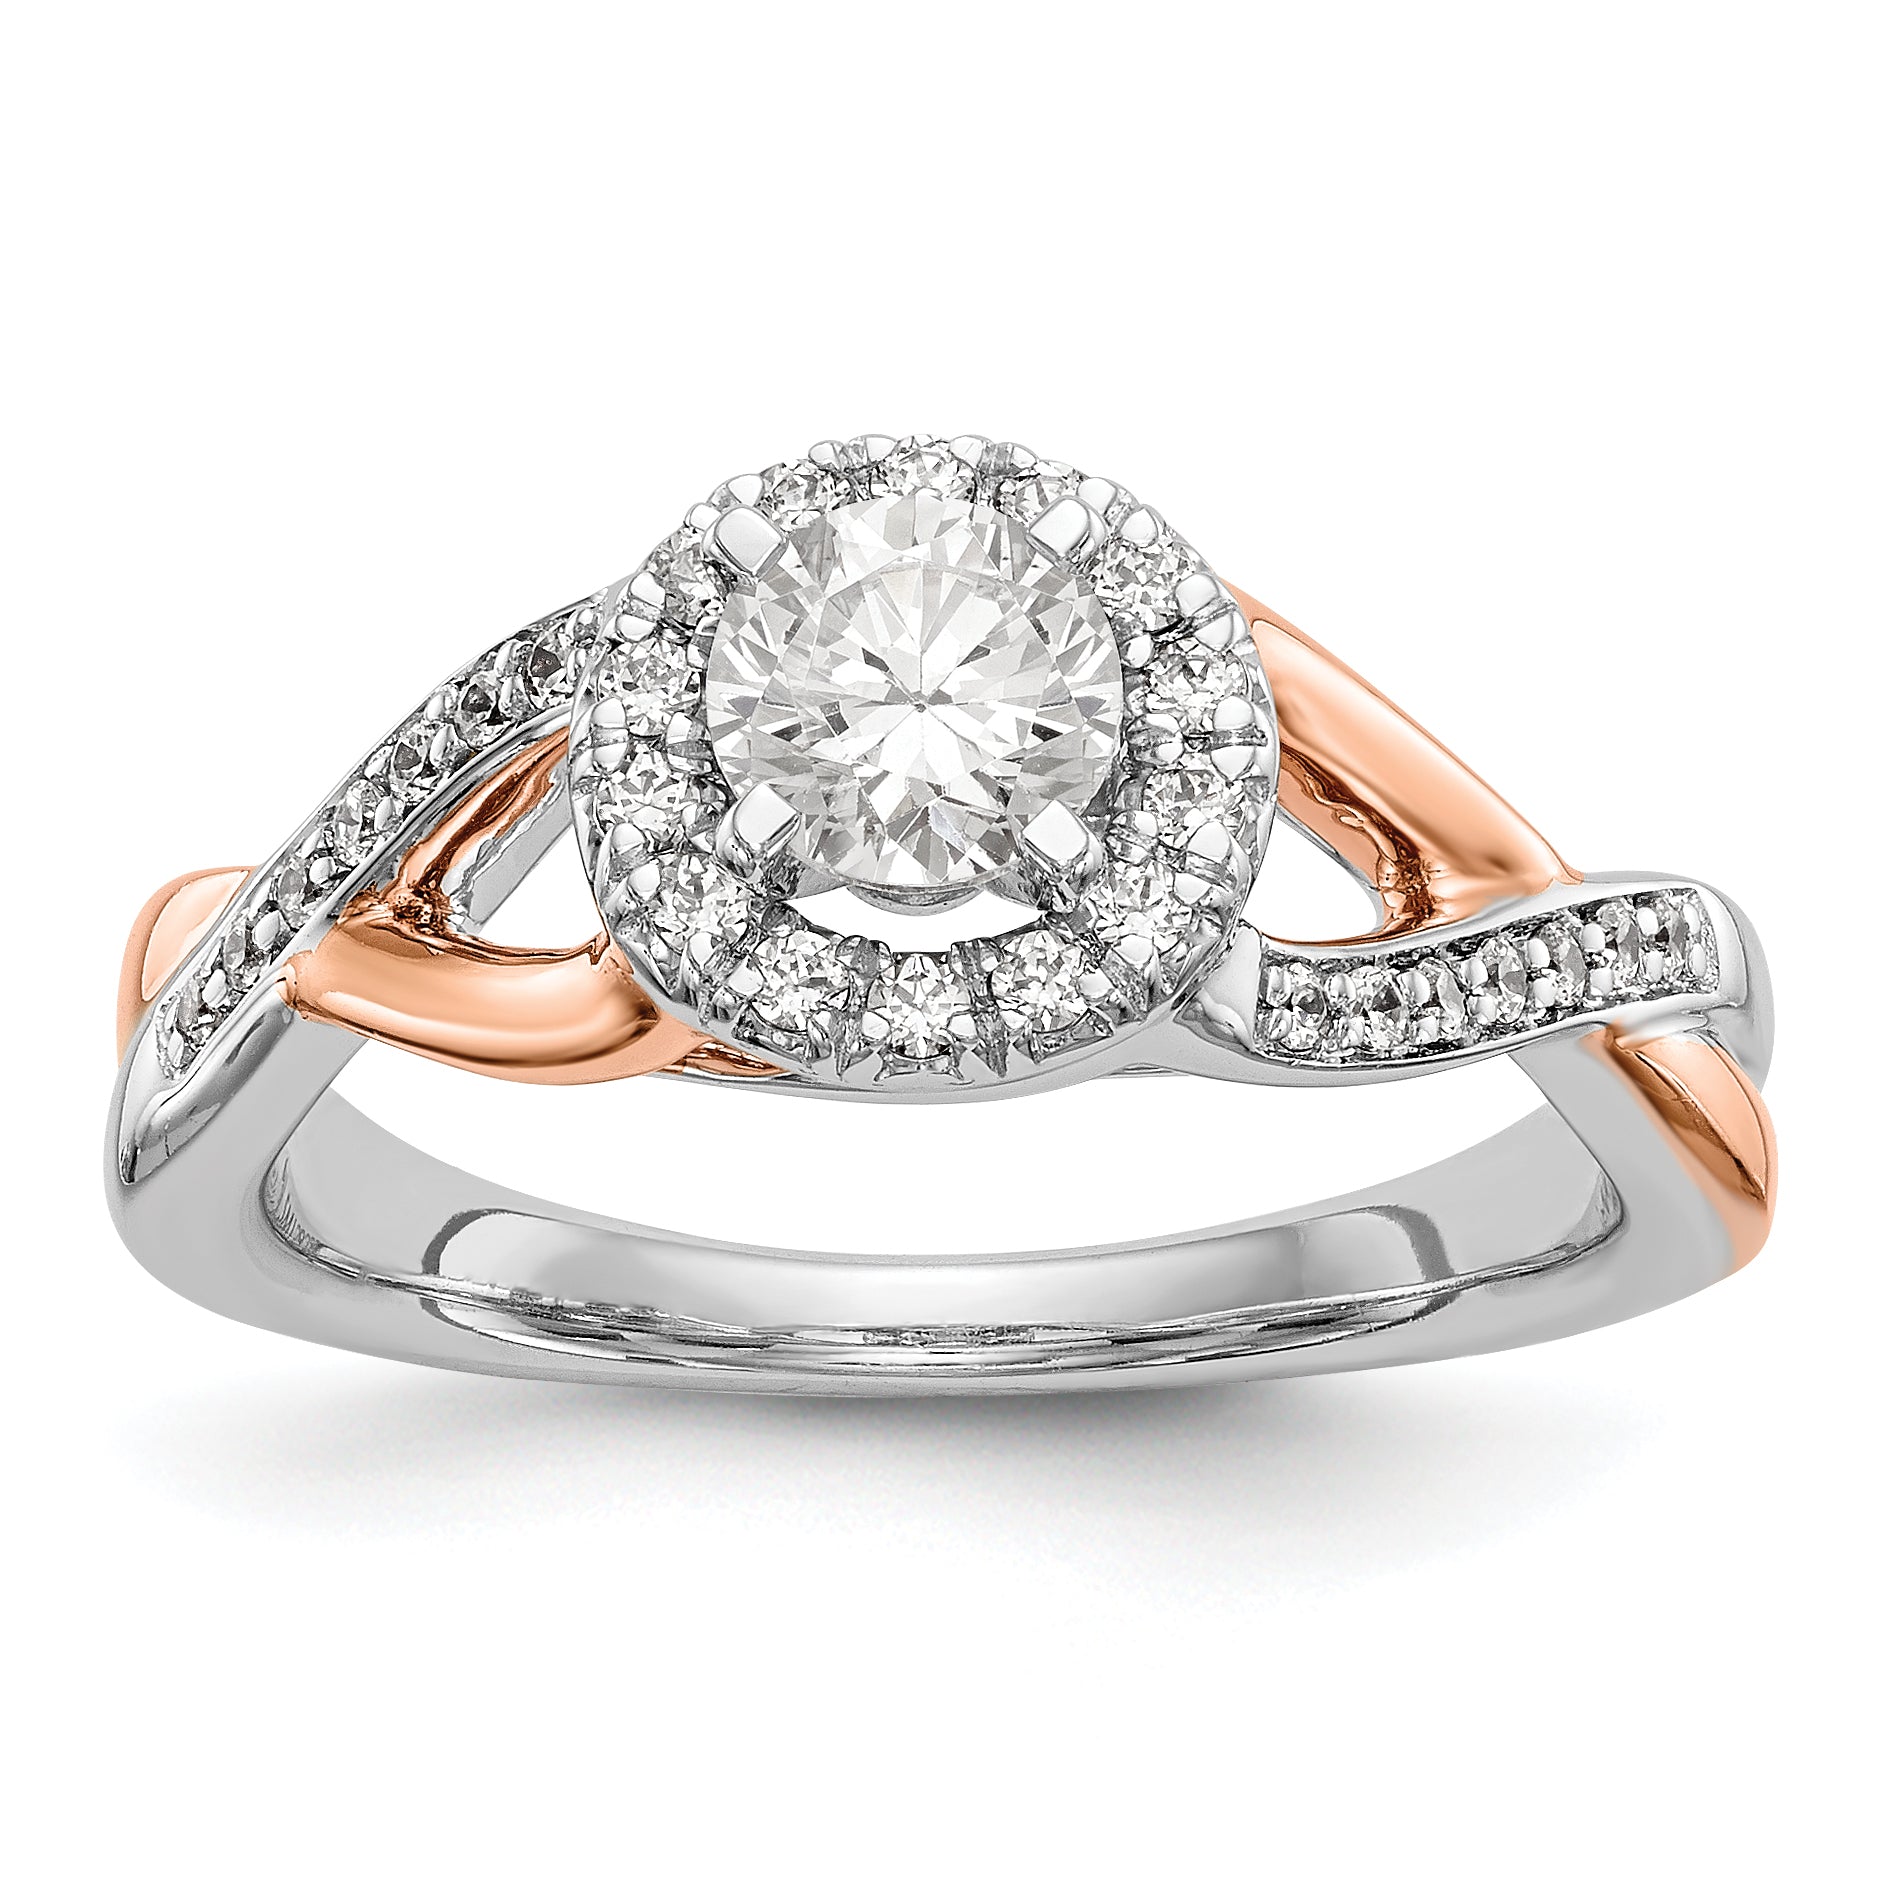 Image of ID 1 14K Rose and White Gold Round Simulated Diamond Halo Engagement Ring